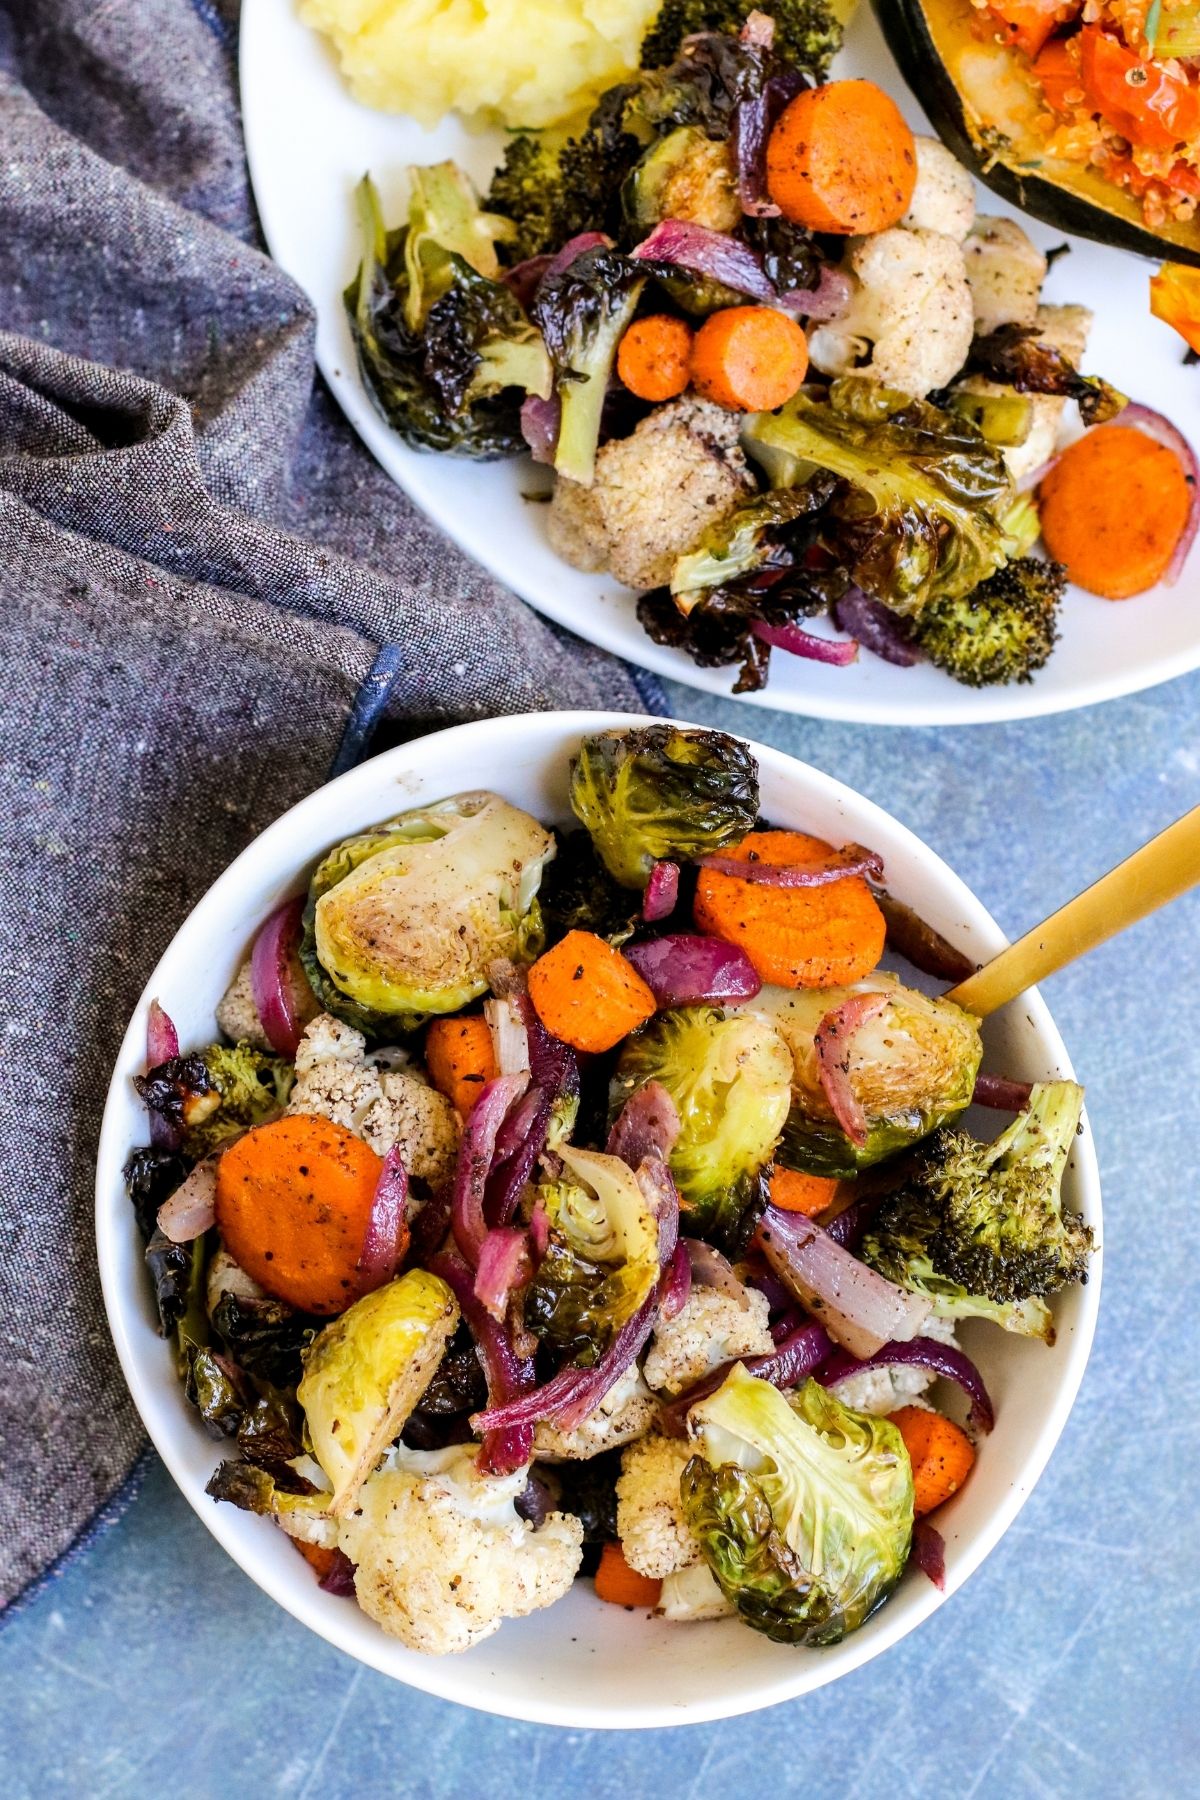 Serving bowl of roasted fall vegetables next to dinner plate.